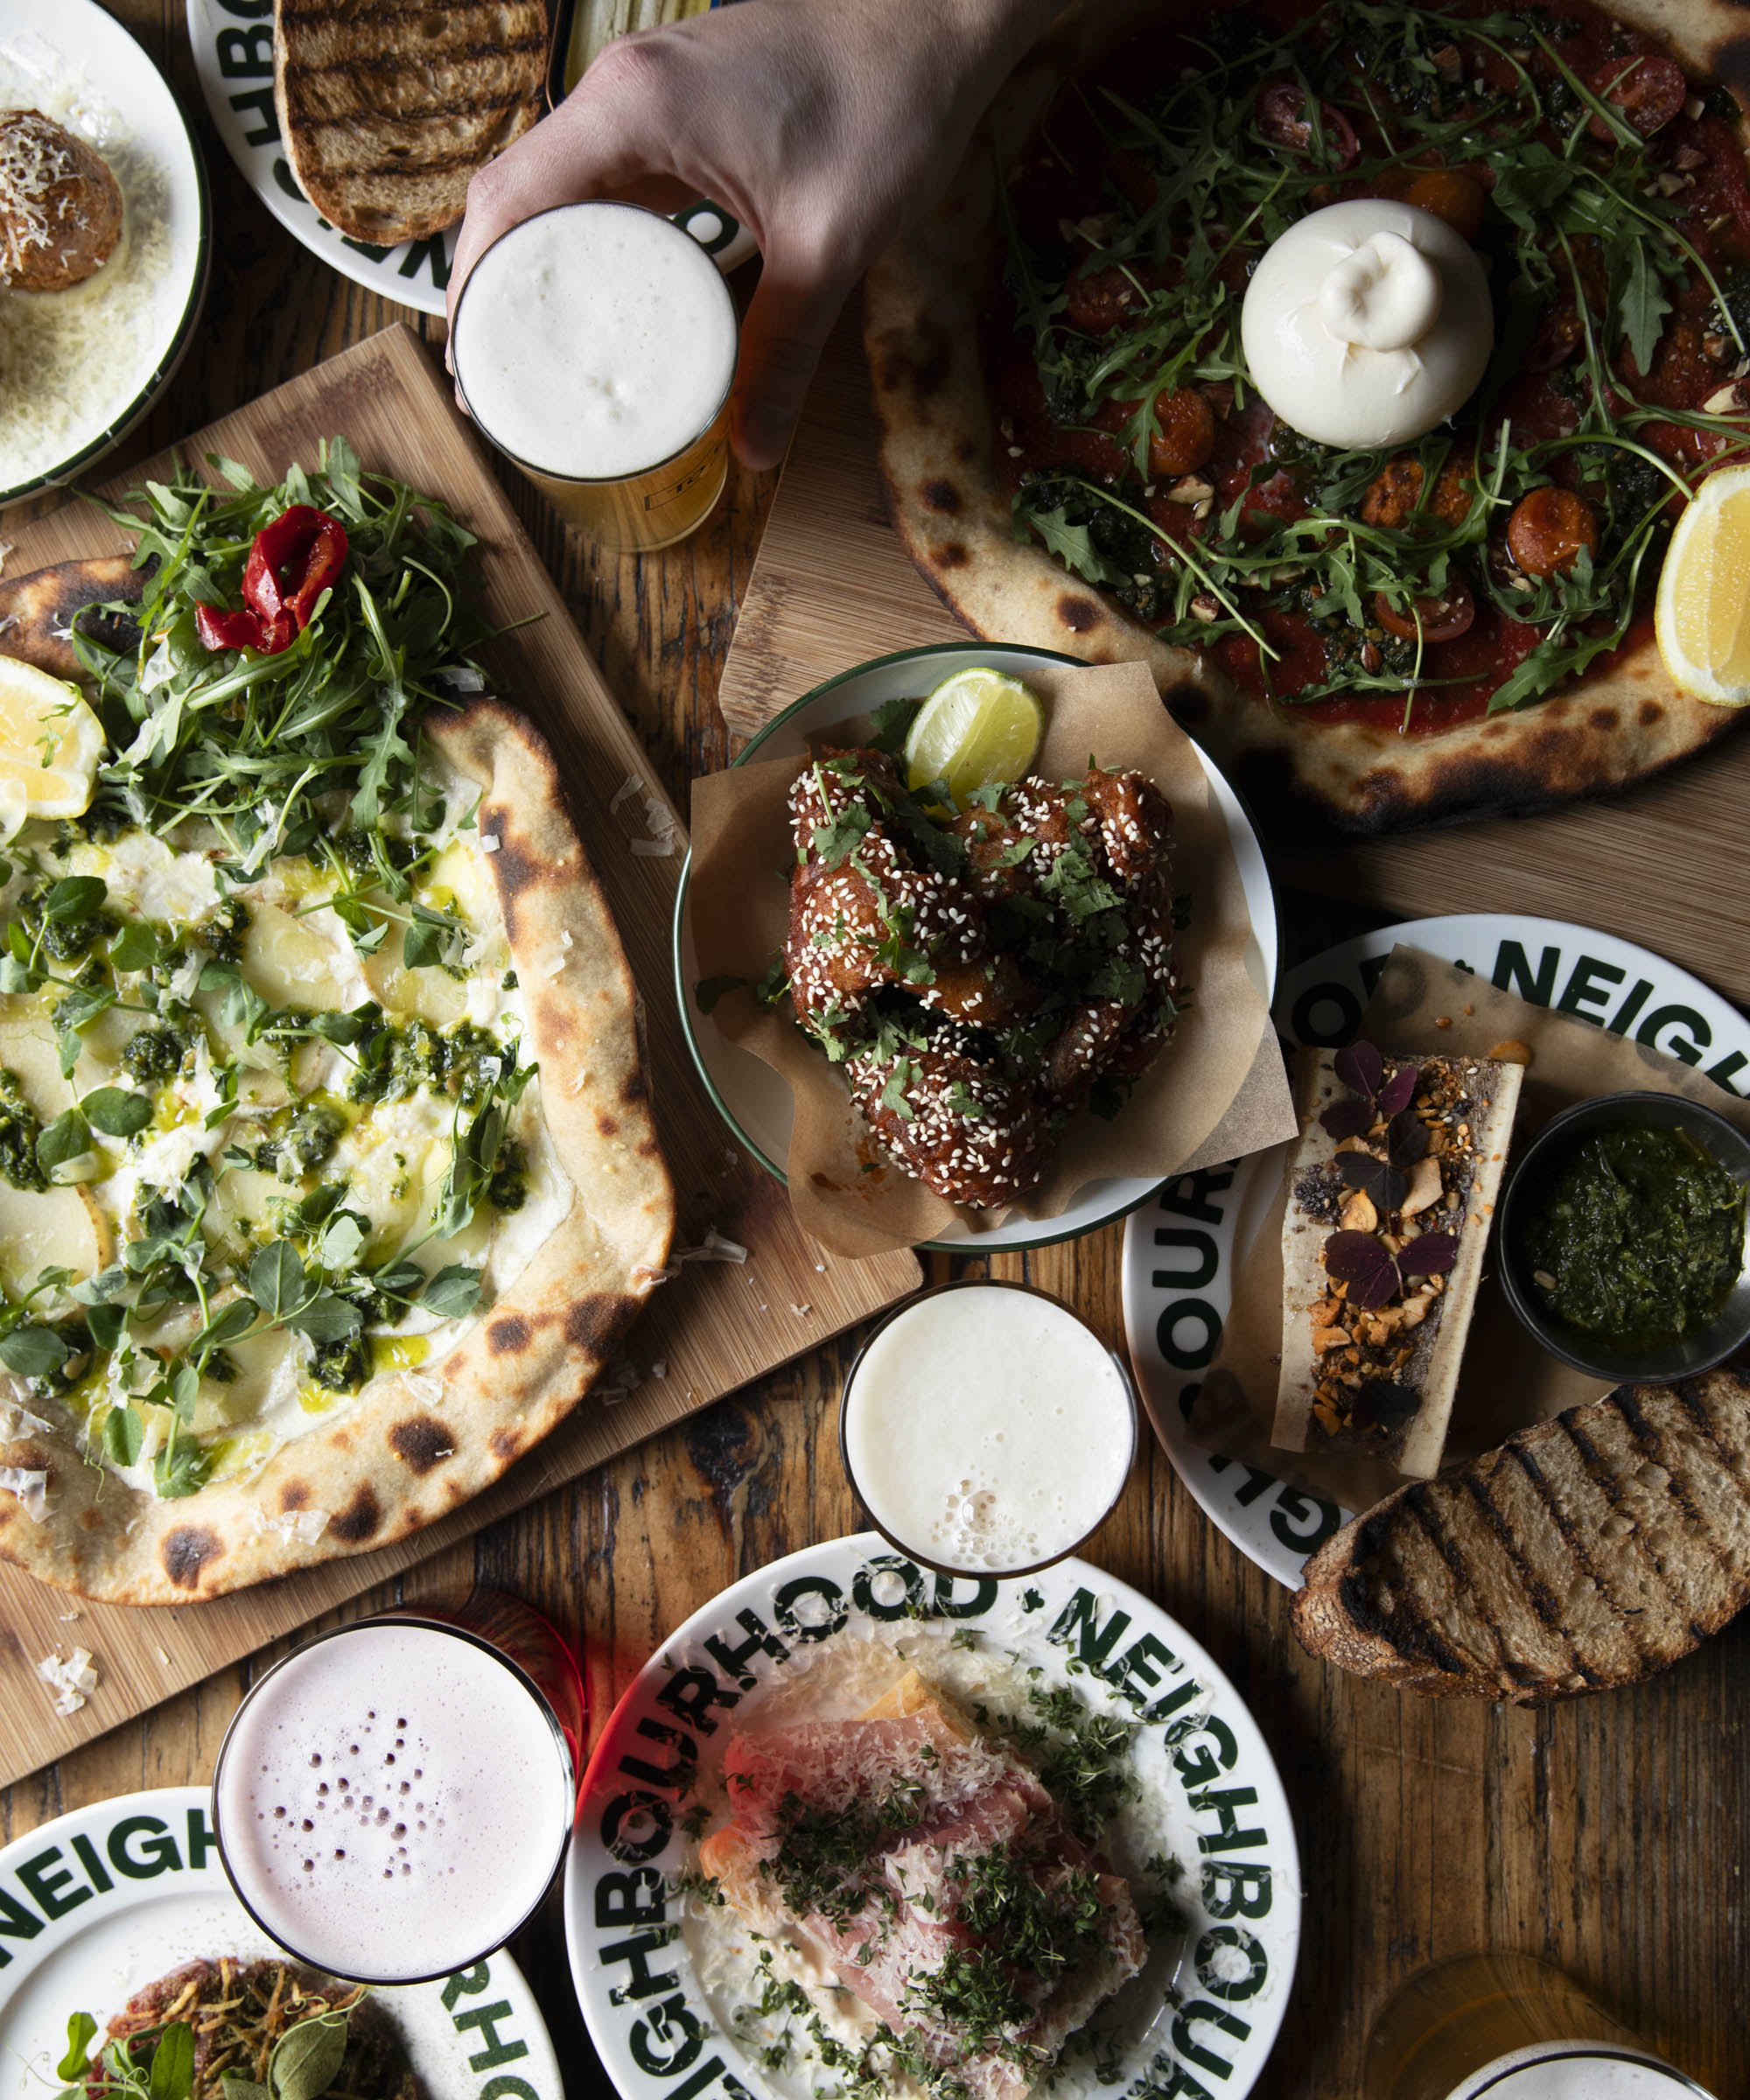 Pick whatever you like at Neighbourhood on Istedgade – This popular pizza place recently re-opened with craft beer, spicy Korean BBQ wings, truffle arancini, and more added to the mix